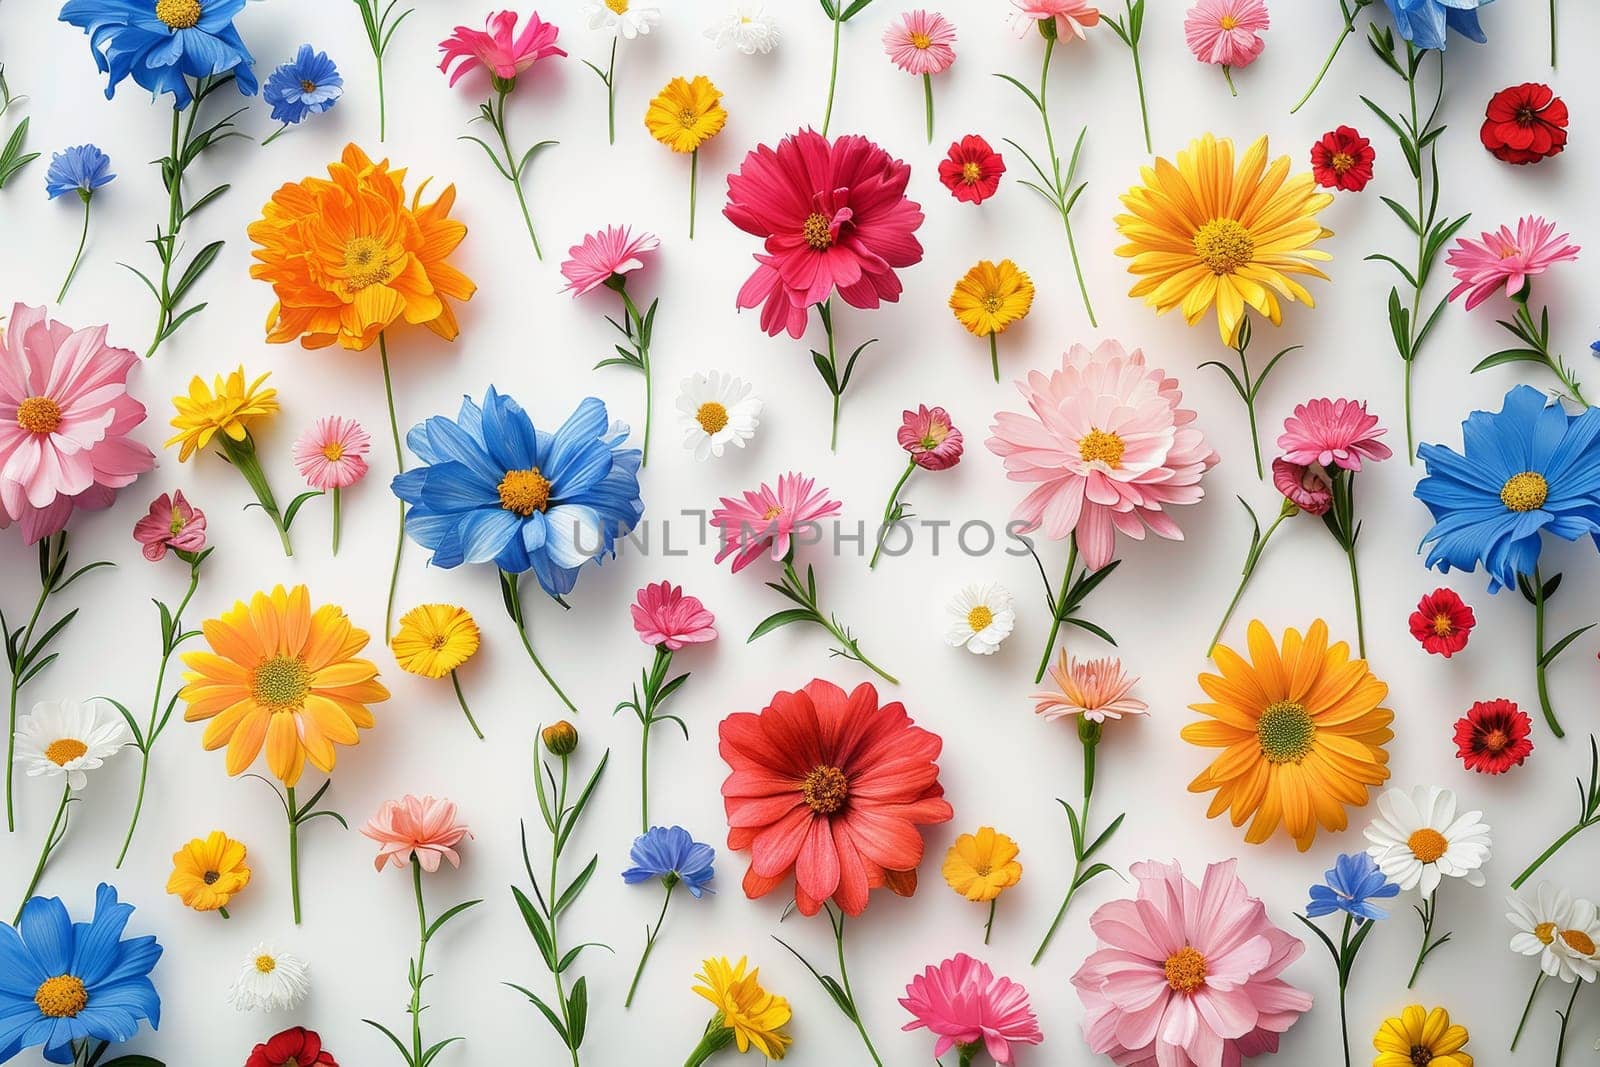 A colorful bouquet of flowers with a variety of colors including red, yellow, blue, and white